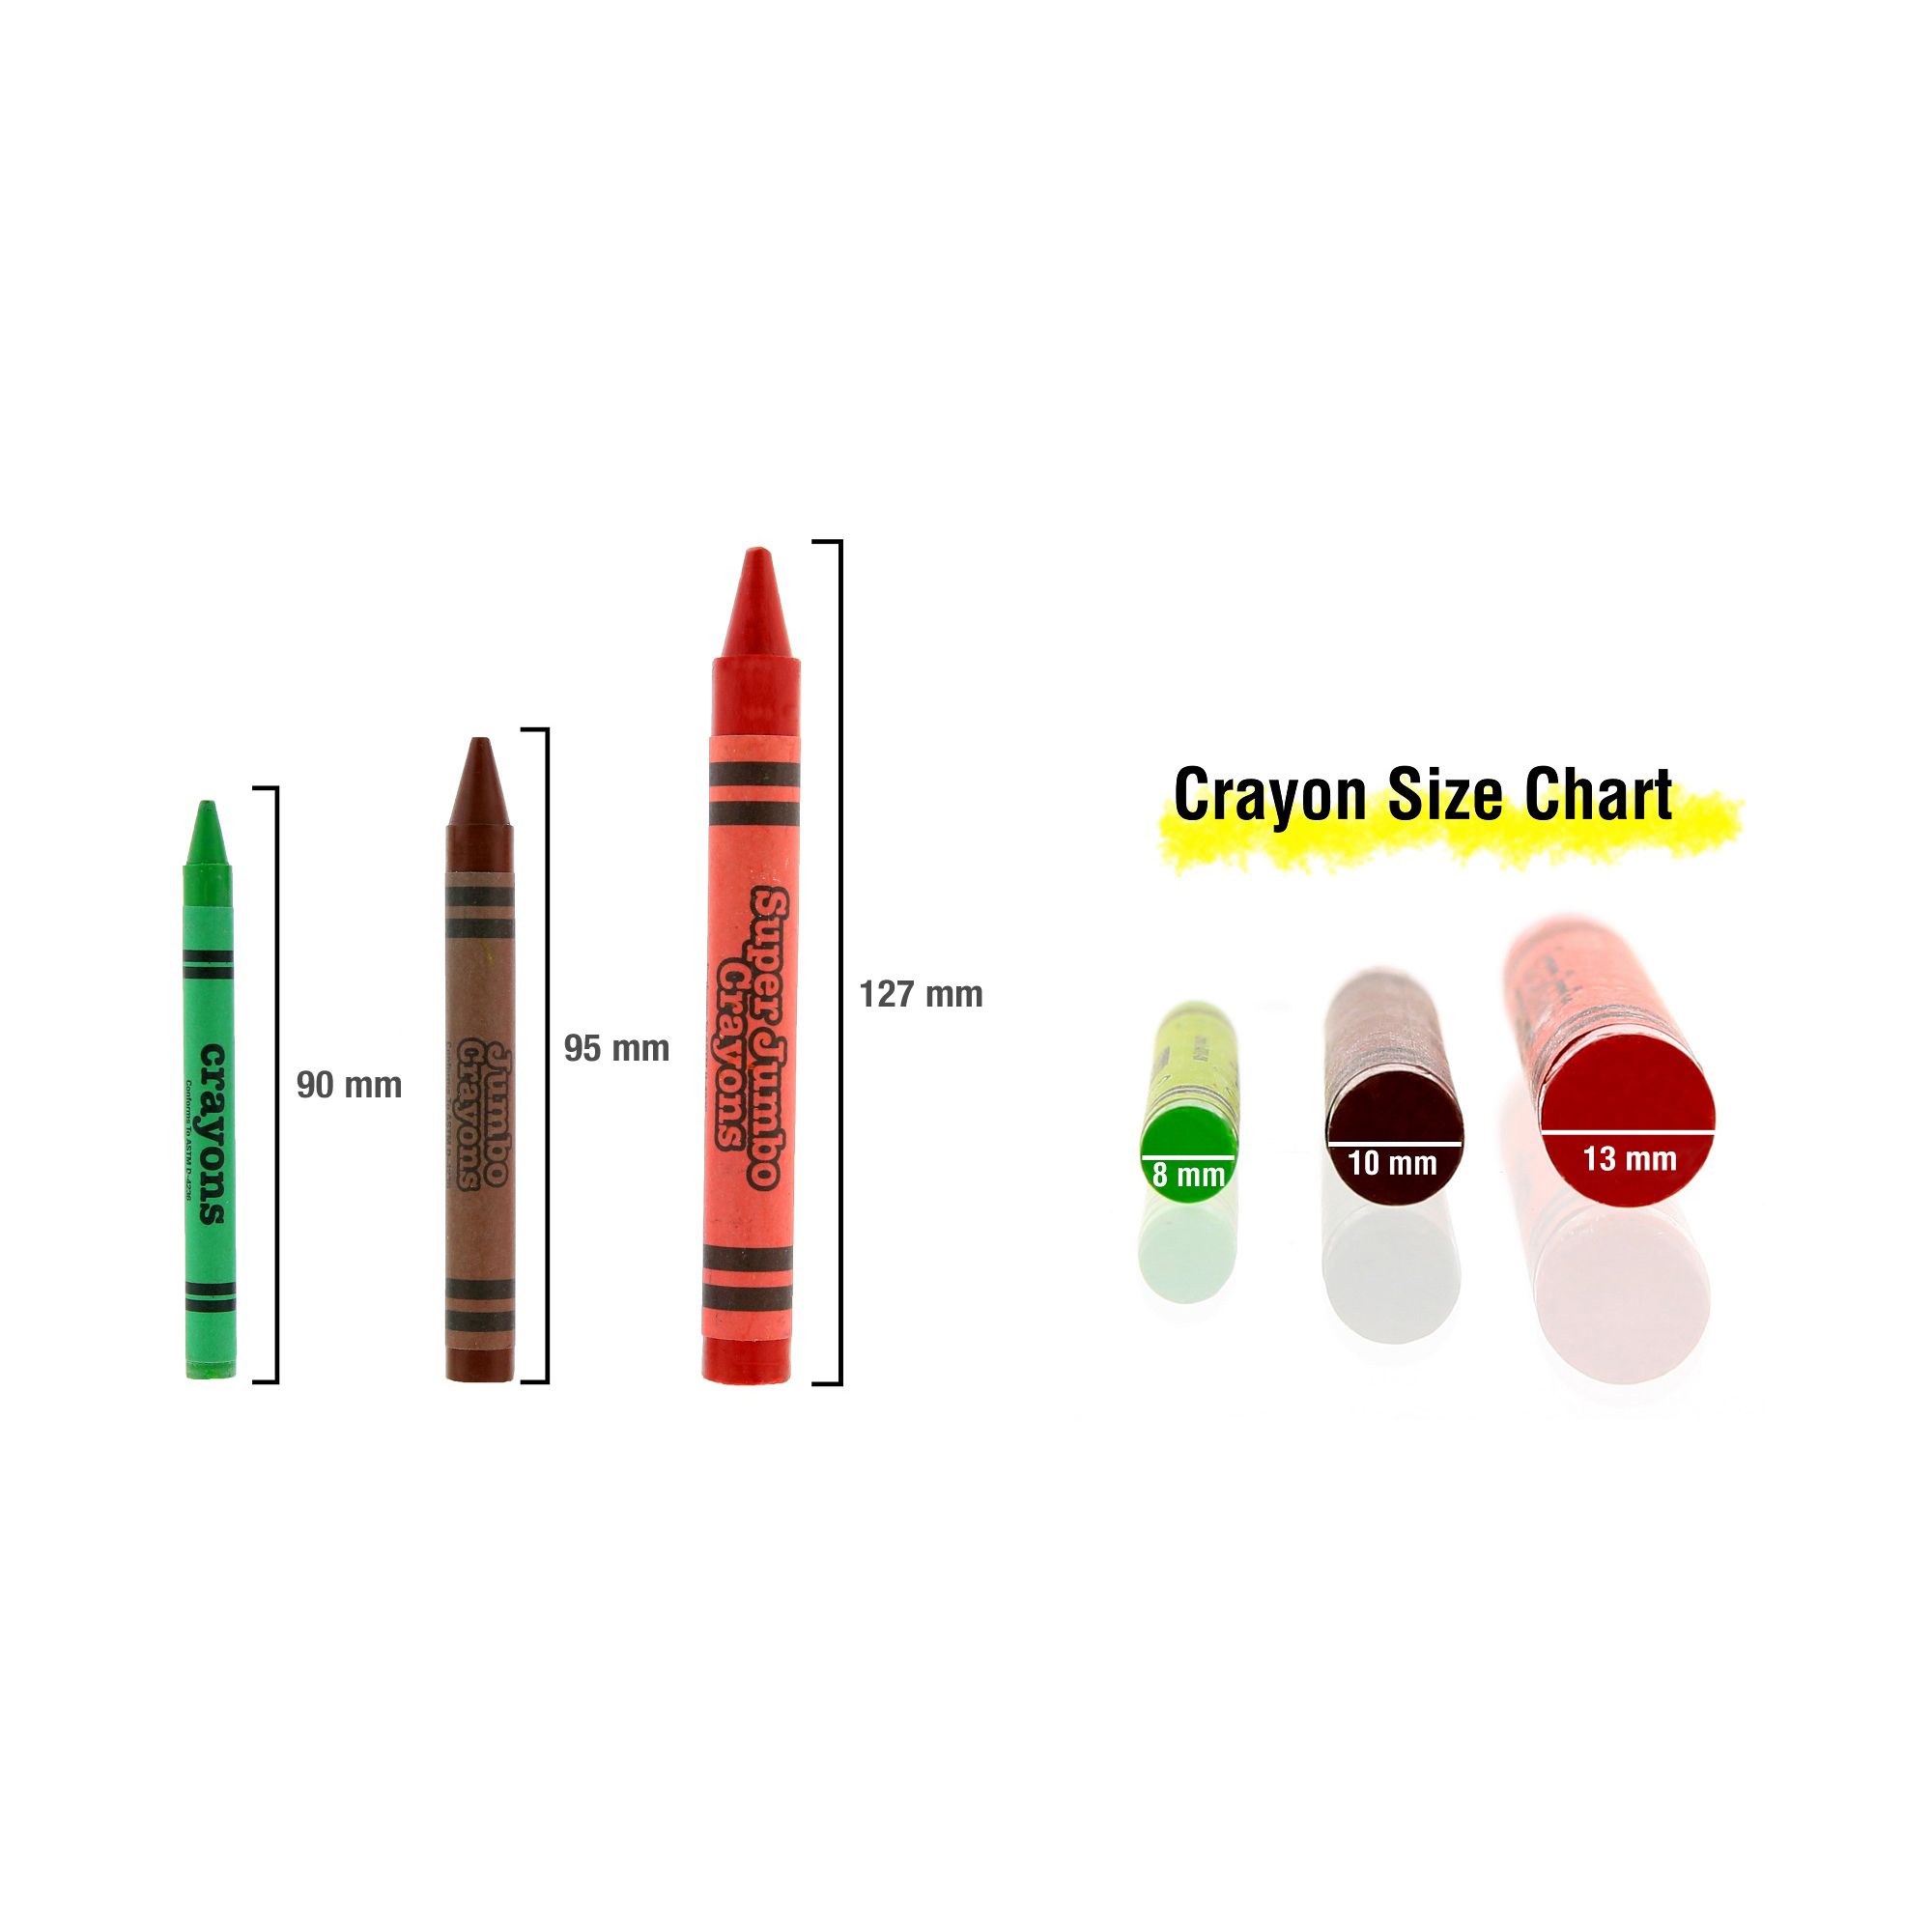 Crayola Crayons Large Size Truck Box (Pack of 8)